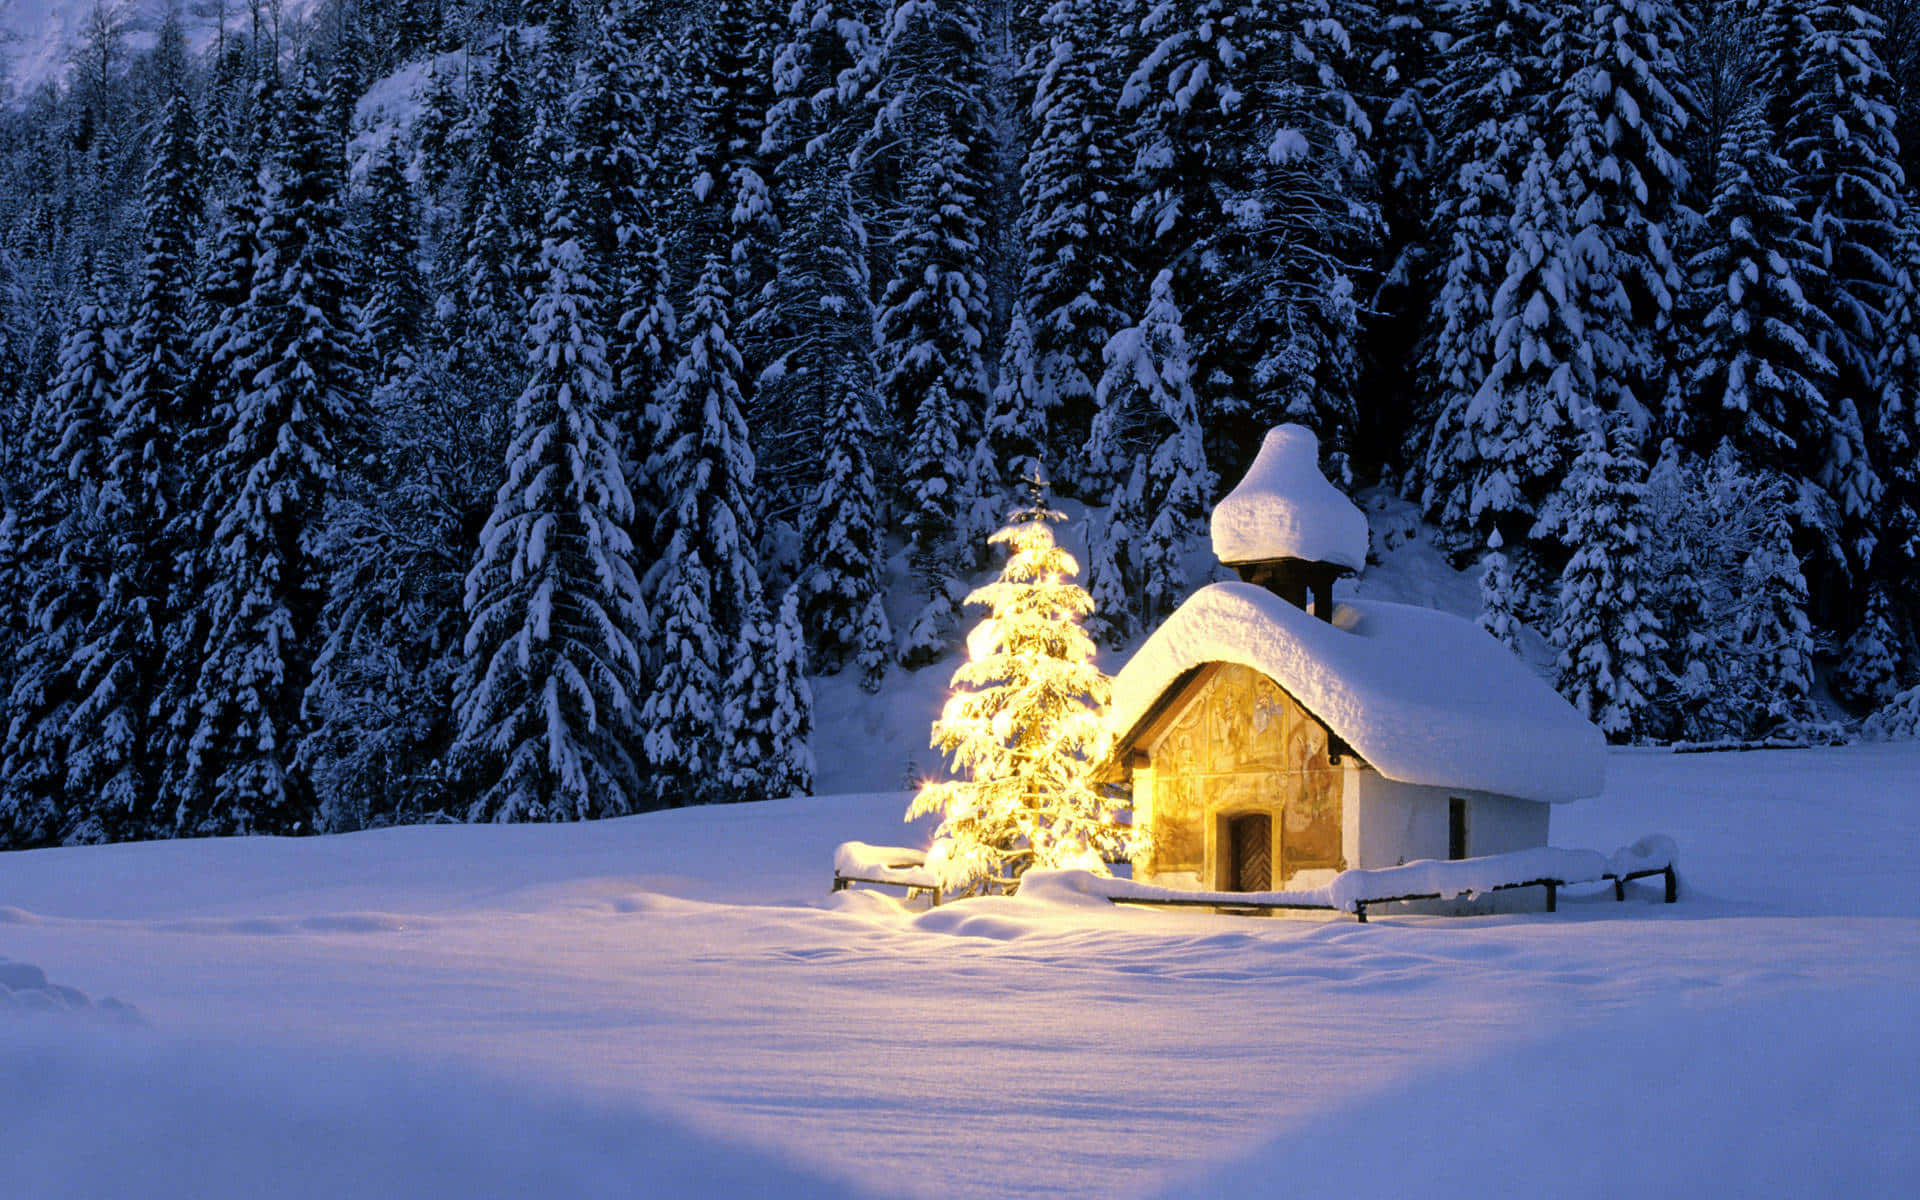 Welcome the joy of winter with a snow-covered Christmas! Wallpaper